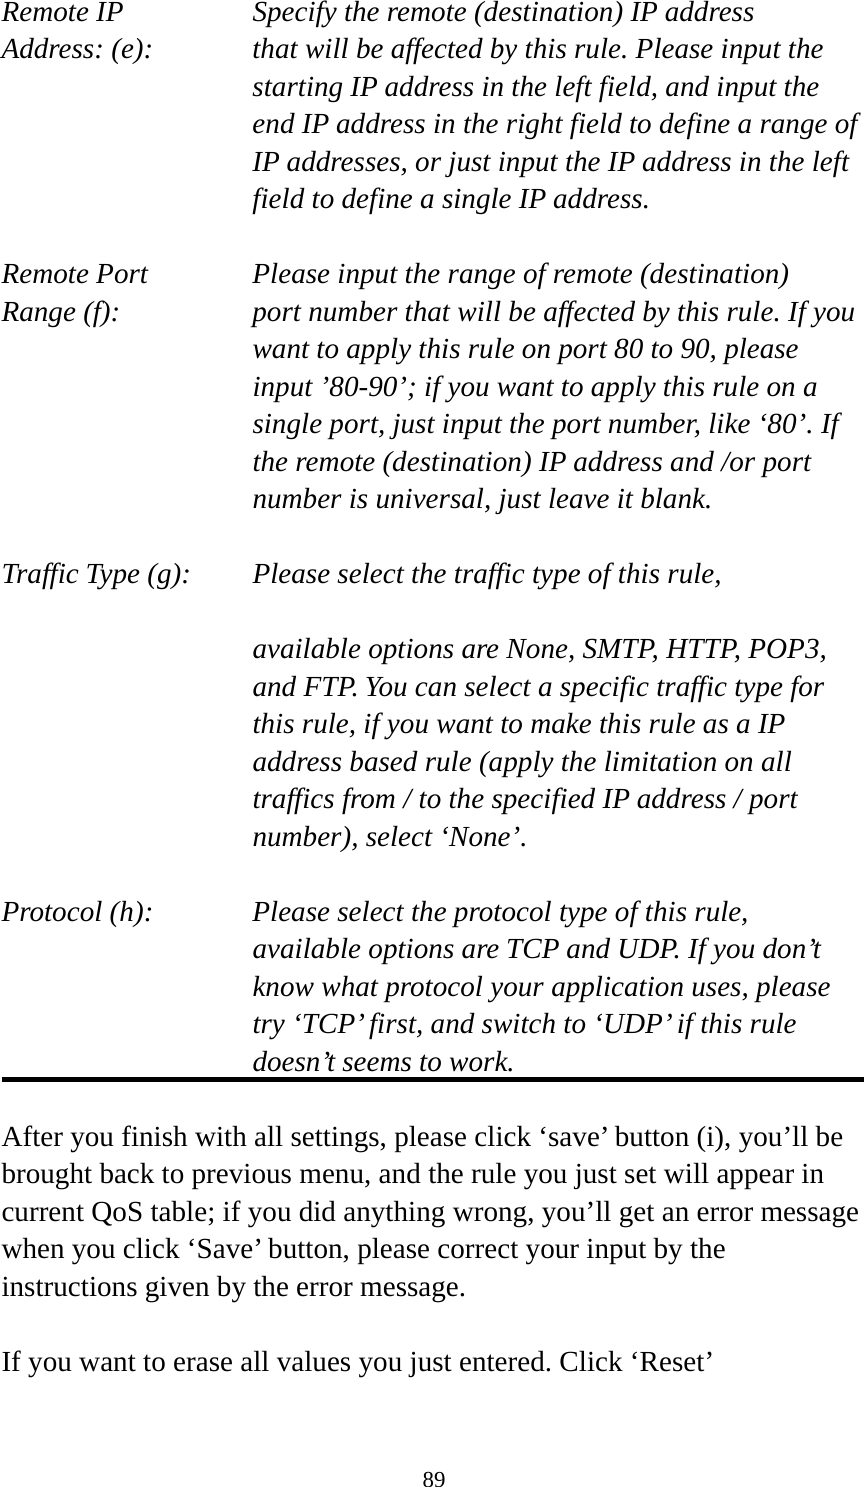 89 Remote IP        Specify the remote (destination) IP address Address: (e):    that will be affected by this rule. Please input the starting IP address in the left field, and input the end IP address in the right field to define a range of IP addresses, or just input the IP address in the left field to define a single IP address.  Remote Port      Please input the range of remote (destination) Range (f):  port number that will be affected by this rule. If you want to apply this rule on port 80 to 90, please input ’80-90’; if you want to apply this rule on a single port, just input the port number, like ‘80’. If the remote (destination) IP address and /or port number is universal, just leave it blank.  Traffic Type (g):    Please select the traffic type of this rule,  available options are None, SMTP, HTTP, POP3, and FTP. You can select a specific traffic type for this rule, if you want to make this rule as a IP address based rule (apply the limitation on all traffics from / to the specified IP address / port number), select ‘None’.  Protocol (h):      Please select the protocol type of this rule,   available options are TCP and UDP. If you don’t know what protocol your application uses, please try ‘TCP’ first, and switch to ‘UDP’ if this rule doesn’t seems to work.  After you finish with all settings, please click ‘save’ button (i), you’ll be brought back to previous menu, and the rule you just set will appear in current QoS table; if you did anything wrong, you’ll get an error message when you click ‘Save’ button, please correct your input by the instructions given by the error message.  If you want to erase all values you just entered. Click ‘Reset’ 